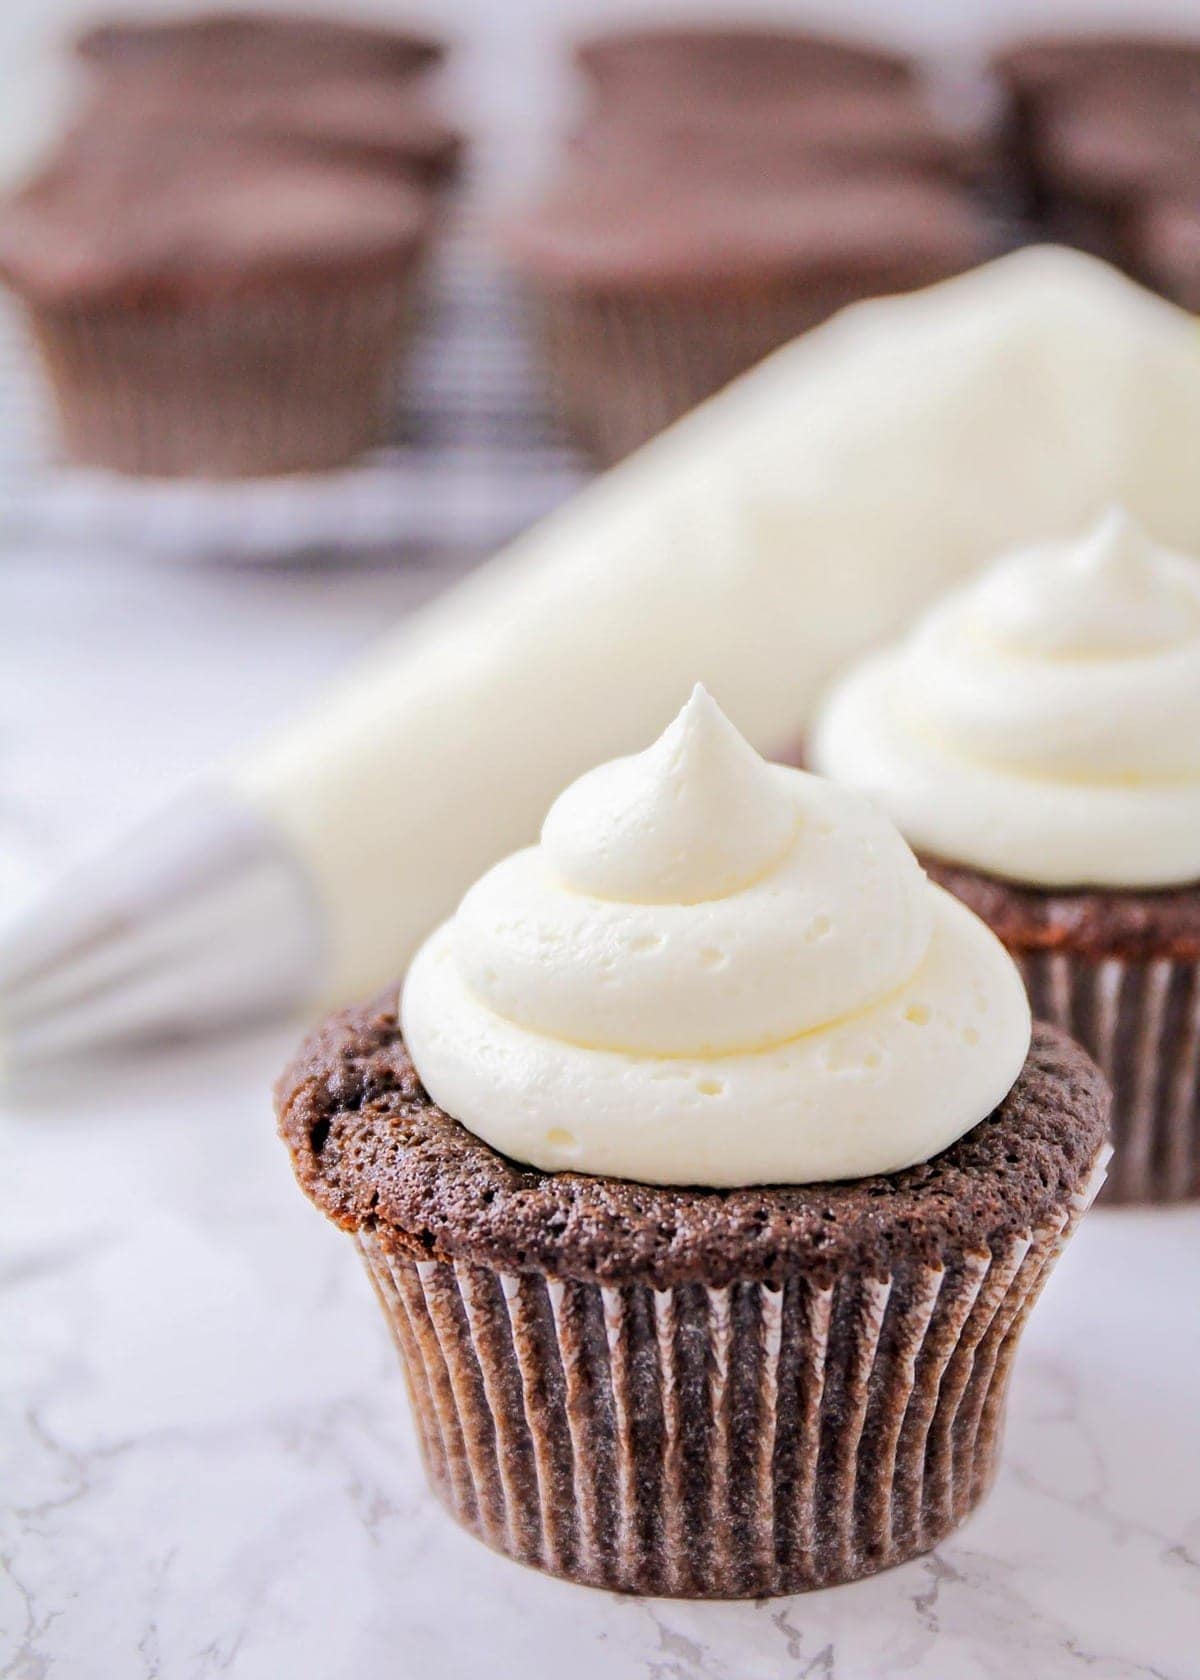 marshmallow frosting on top of a cupcake